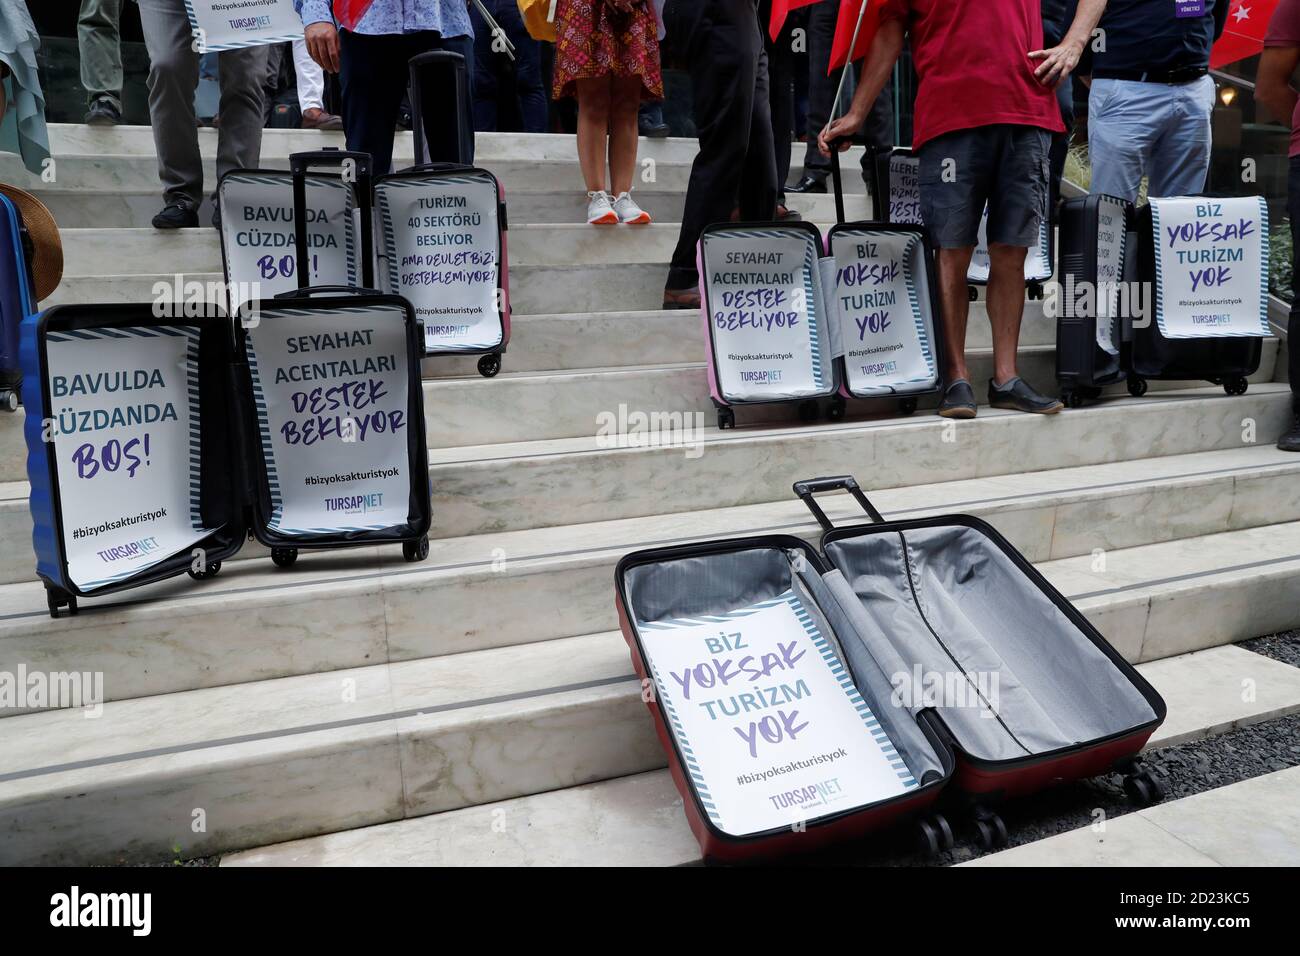 Travel agency owners display empty suitcases following a press statement demanding government's financial support for the tourism business as the spread of the coronavirus disease (COVID-19) continues, in Istanbul, Turkey October 6, 2020. The slogans in the suitcases read: 'Suitcase and wallet are empty!' and 'Travel agencies await support'. REUTERS/Murad Sezer Stock Photo